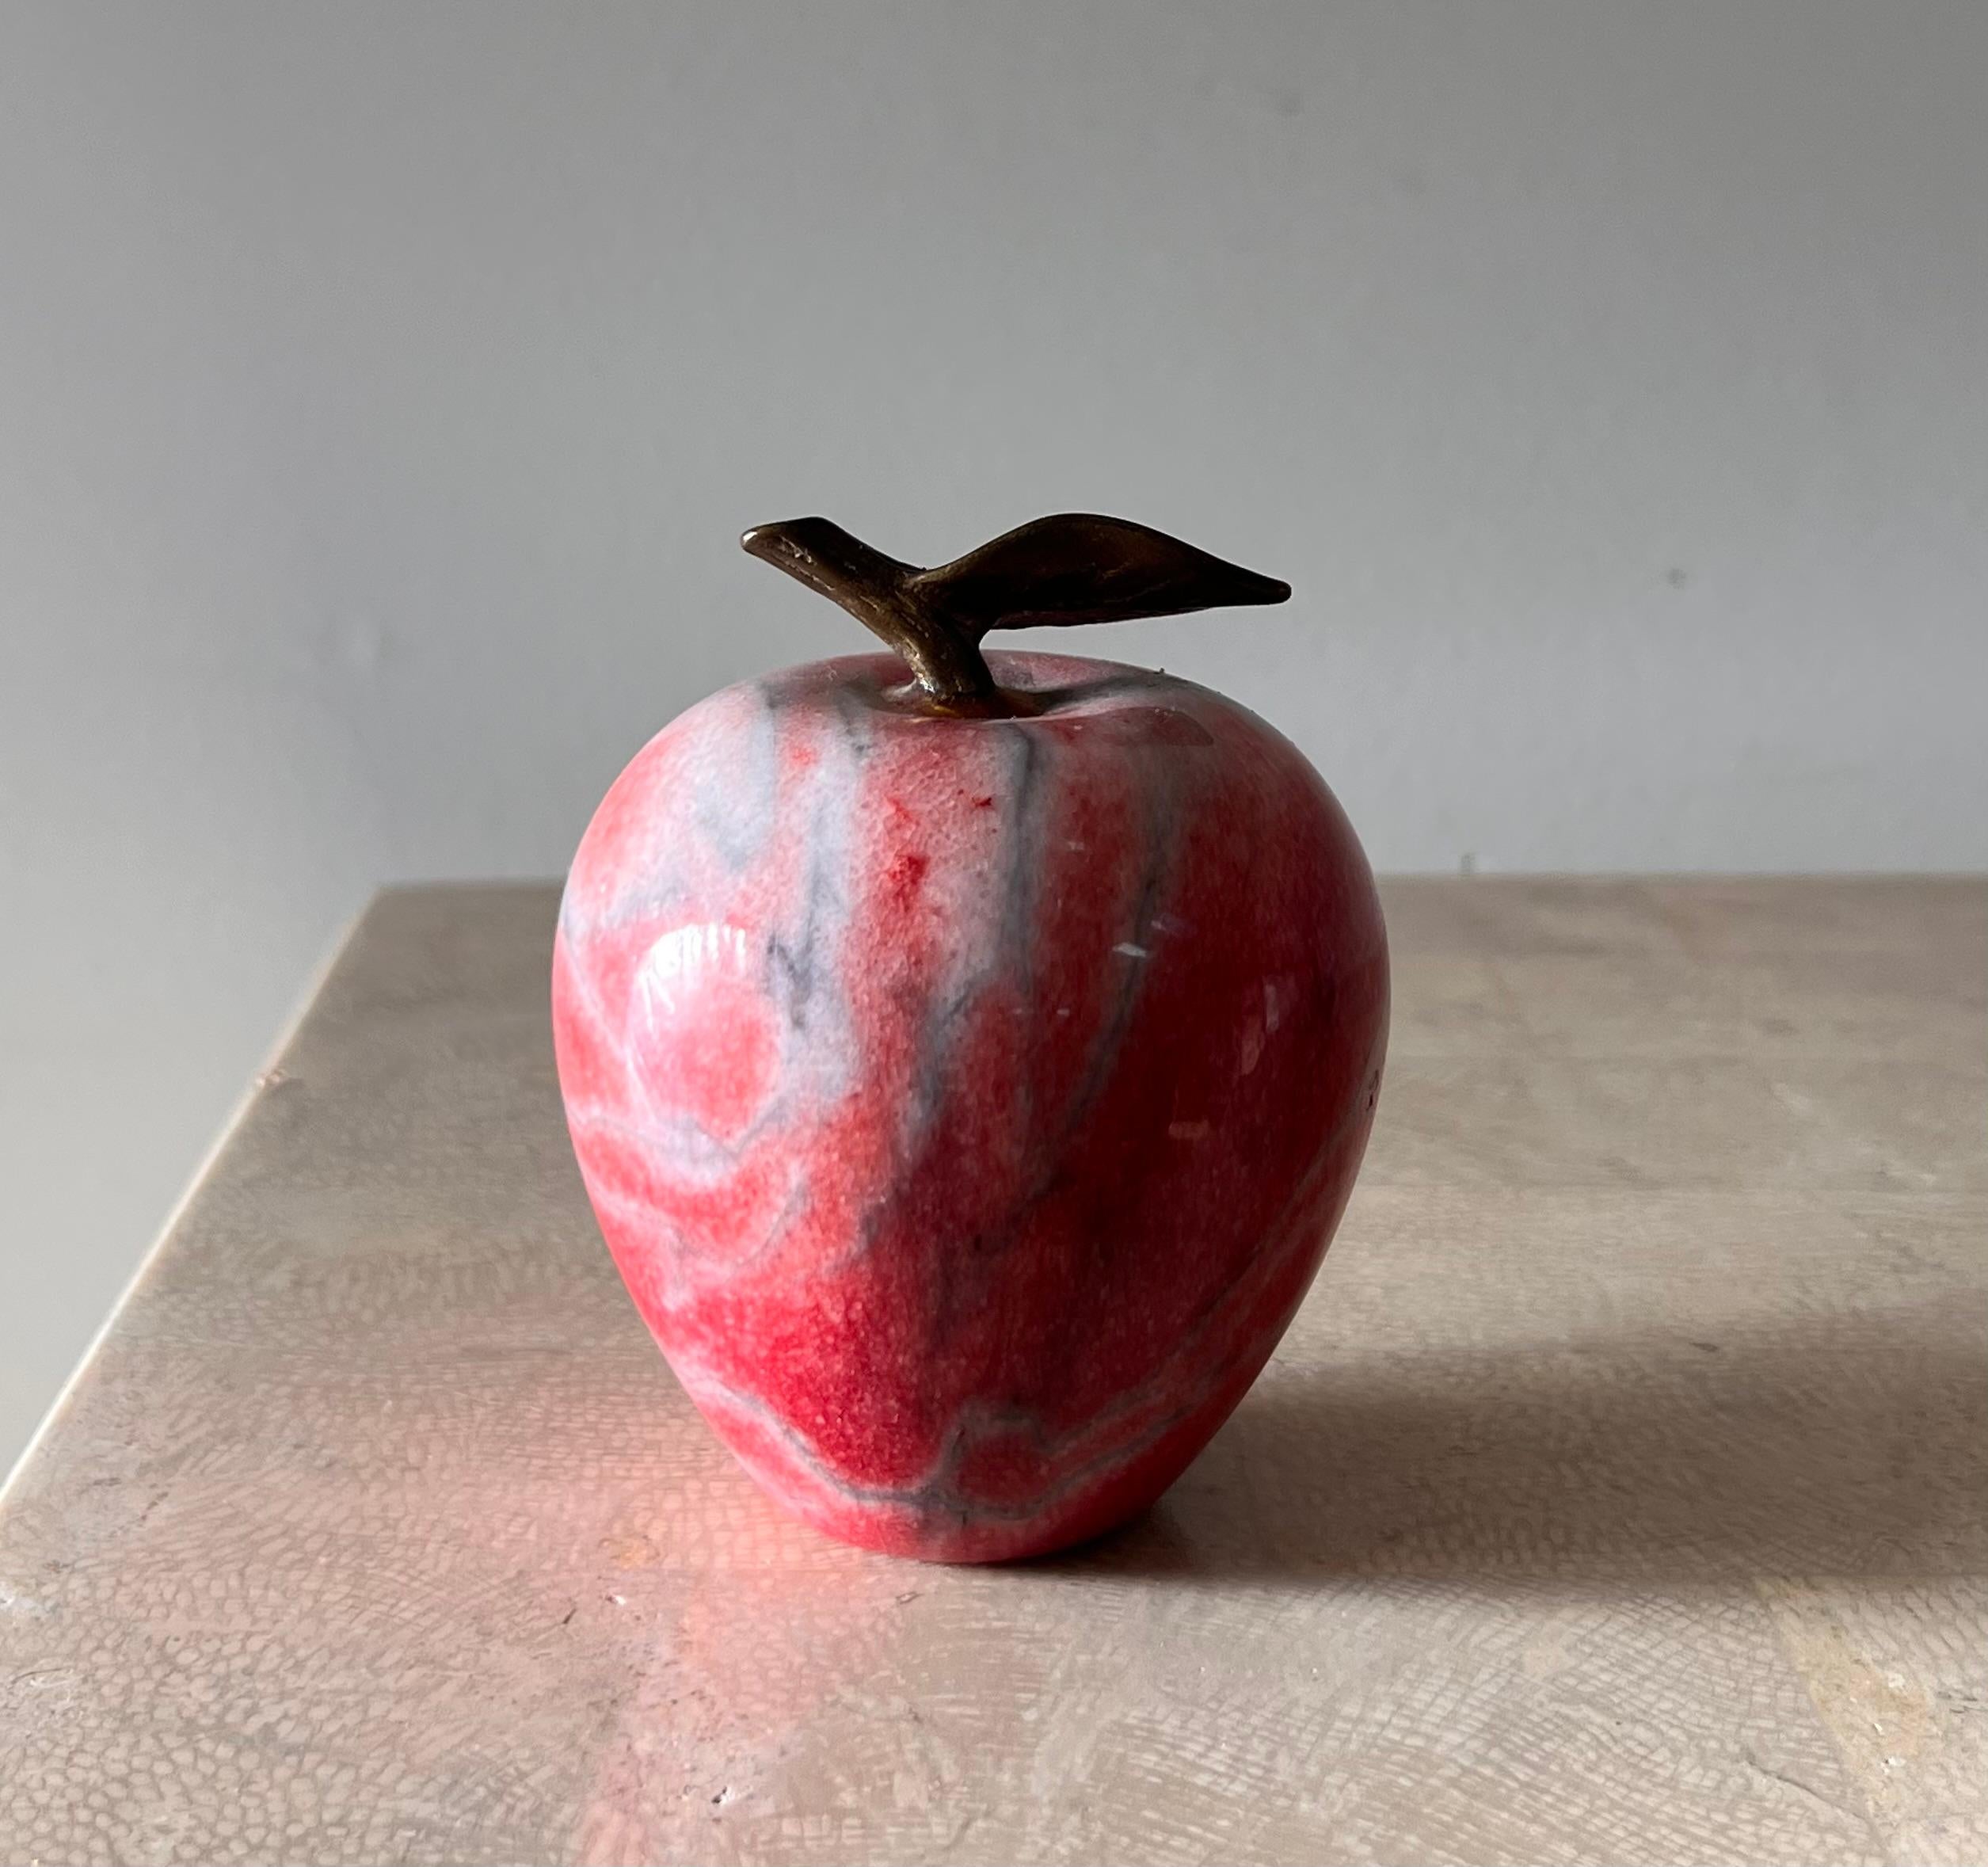 A vintage Italian marble apple paperweight / objet d’art in marble with a bronze stem and leaf, circa early 1960s. Here we have exquisite marbling, with the “fruit” showcasing tones of deep magenta and ivory and ash veining. Fabulous condition.